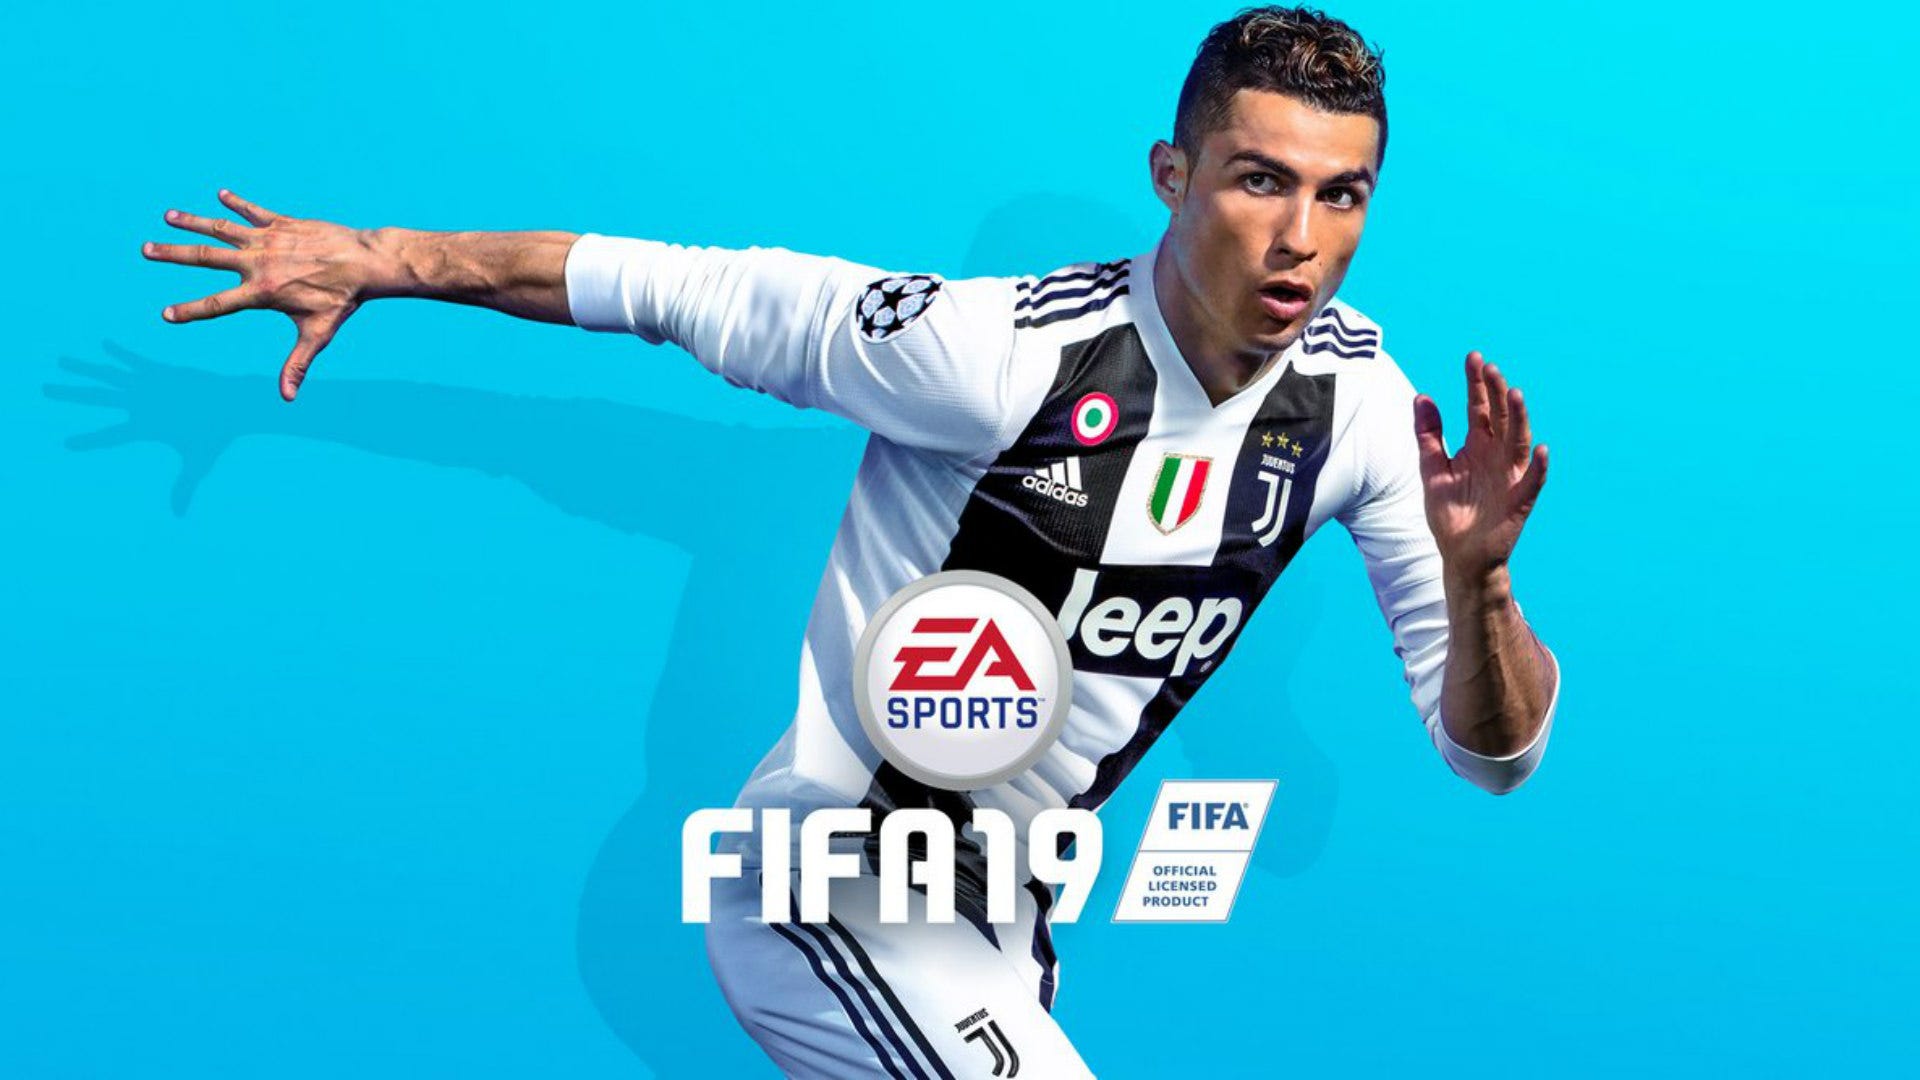 FIFA 19: New features, Ultimate Team, player ratings, cost to buy